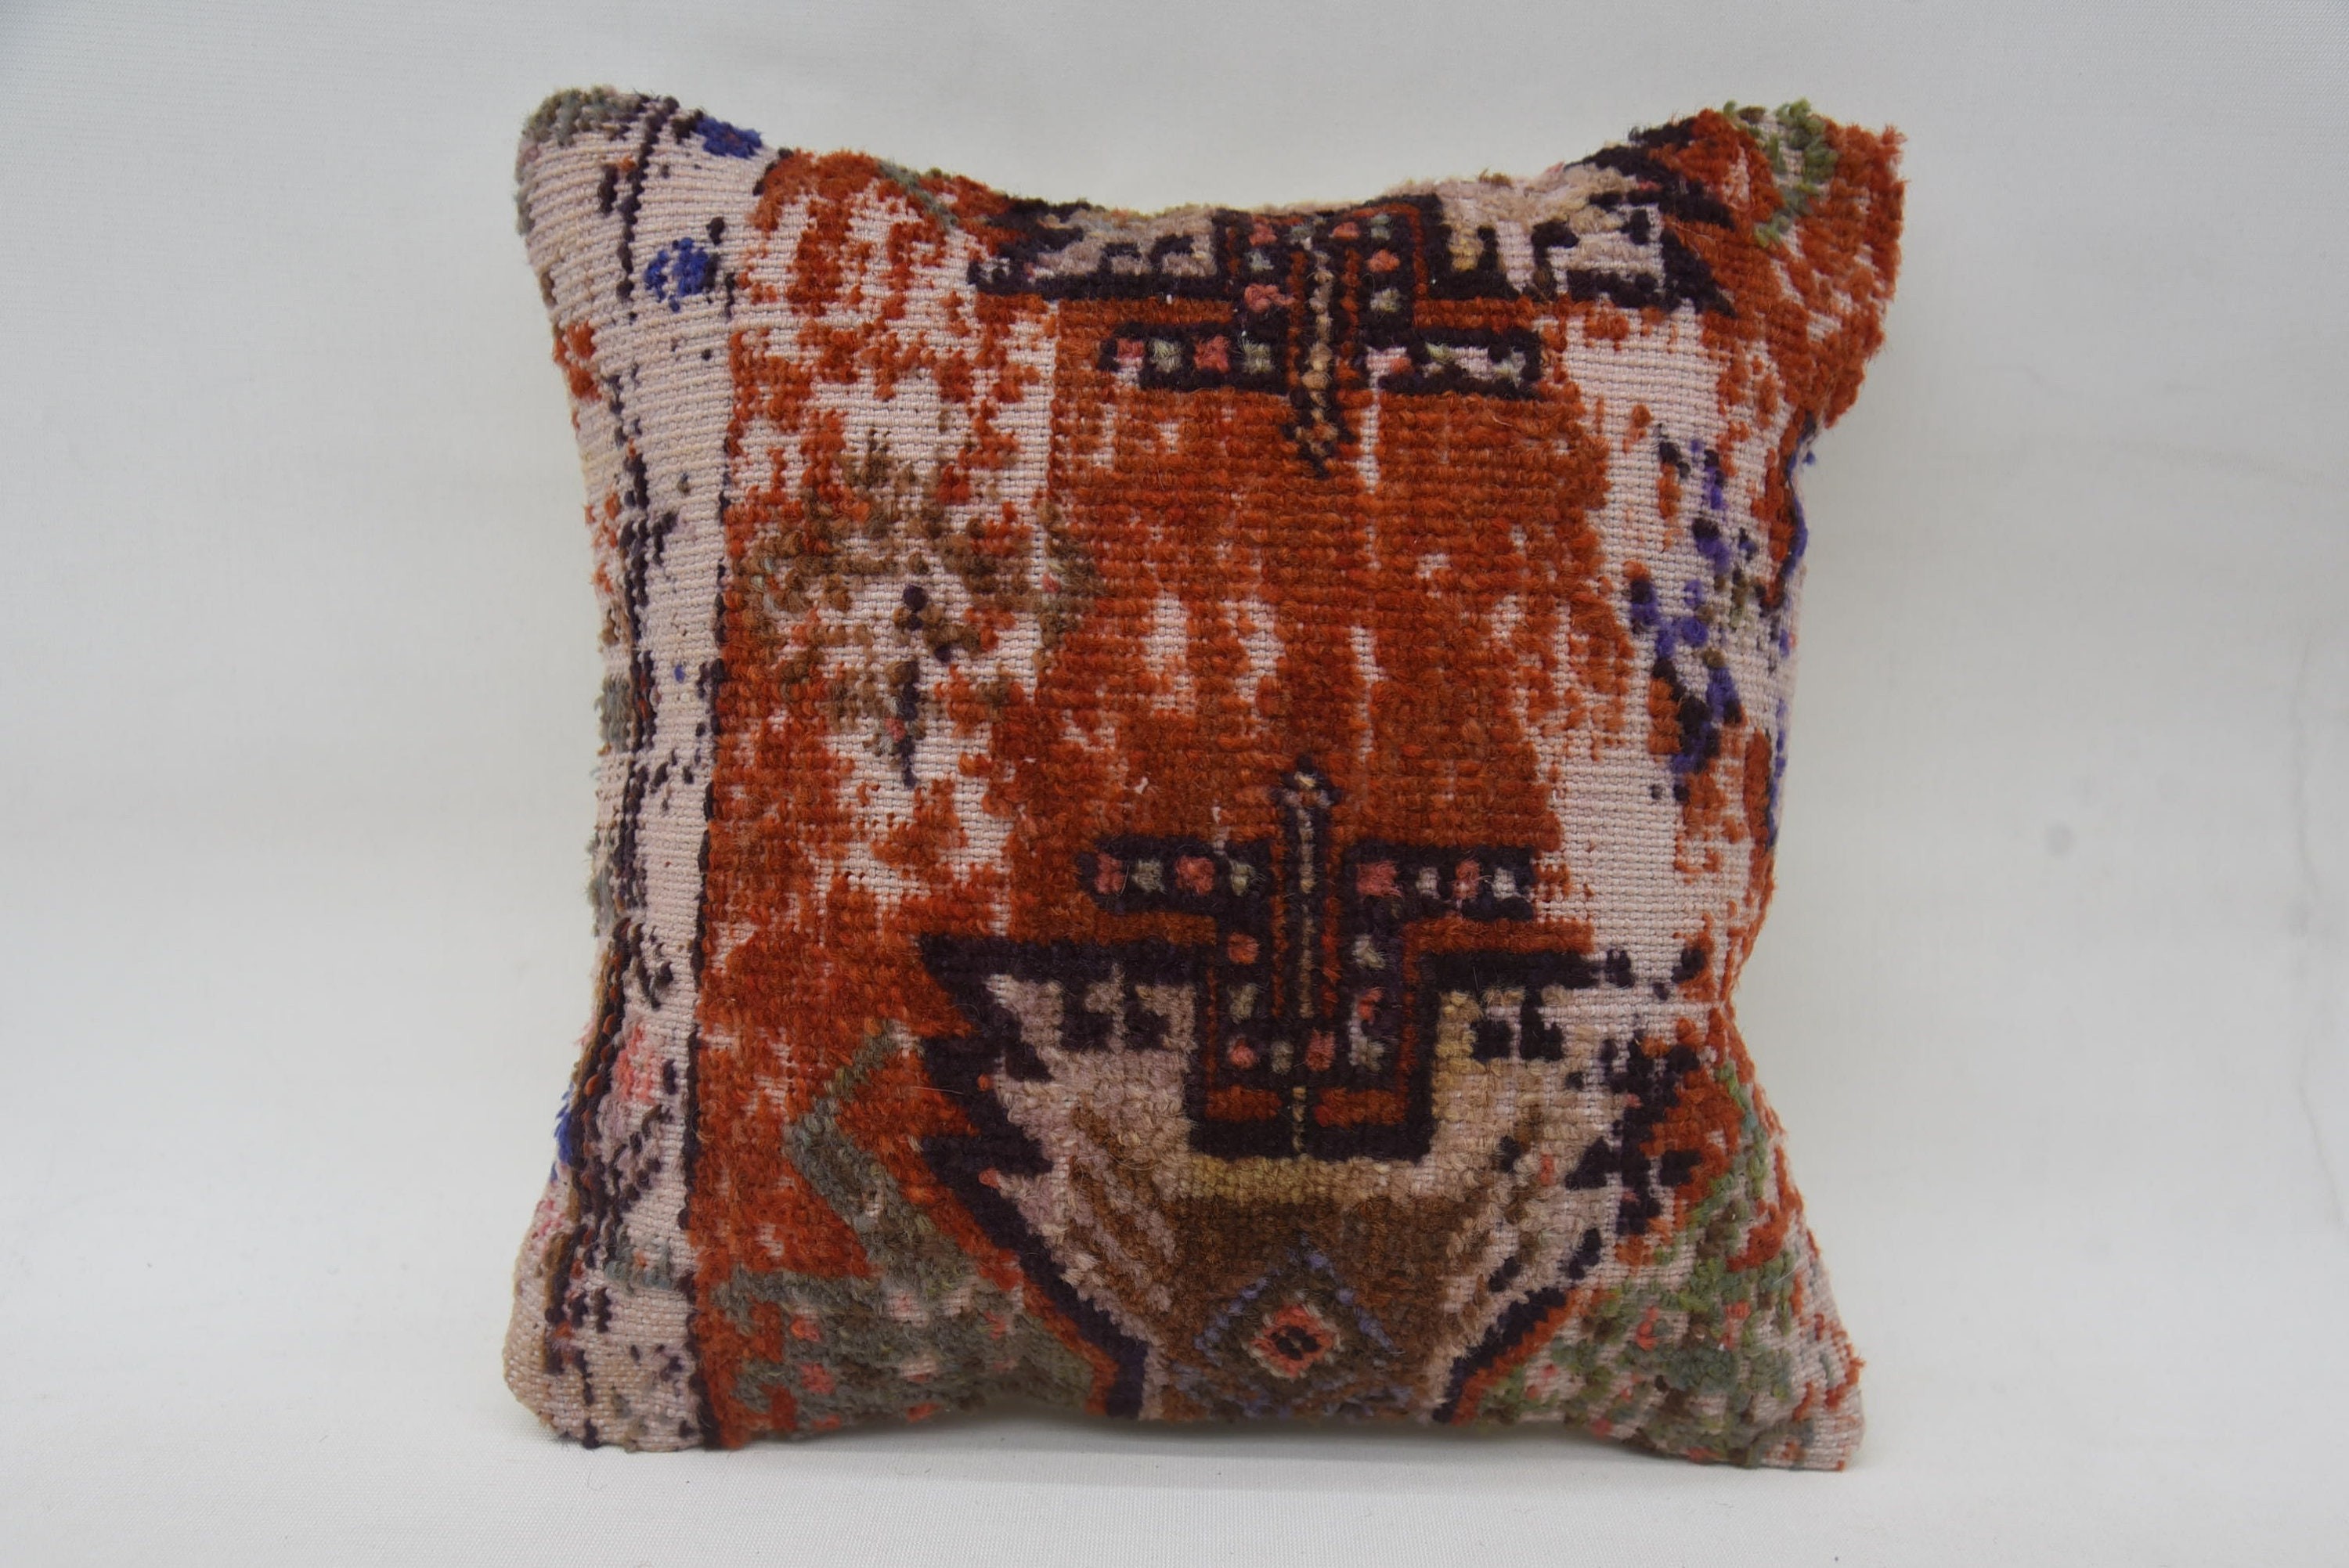 Kilim Pillow Cover, Vintage Pillow, 12"x12" Red Pillow Cover, Accent Cushion Case, Kilim Pillow, Muted Cushion Cover, Ikat Cushion Cover